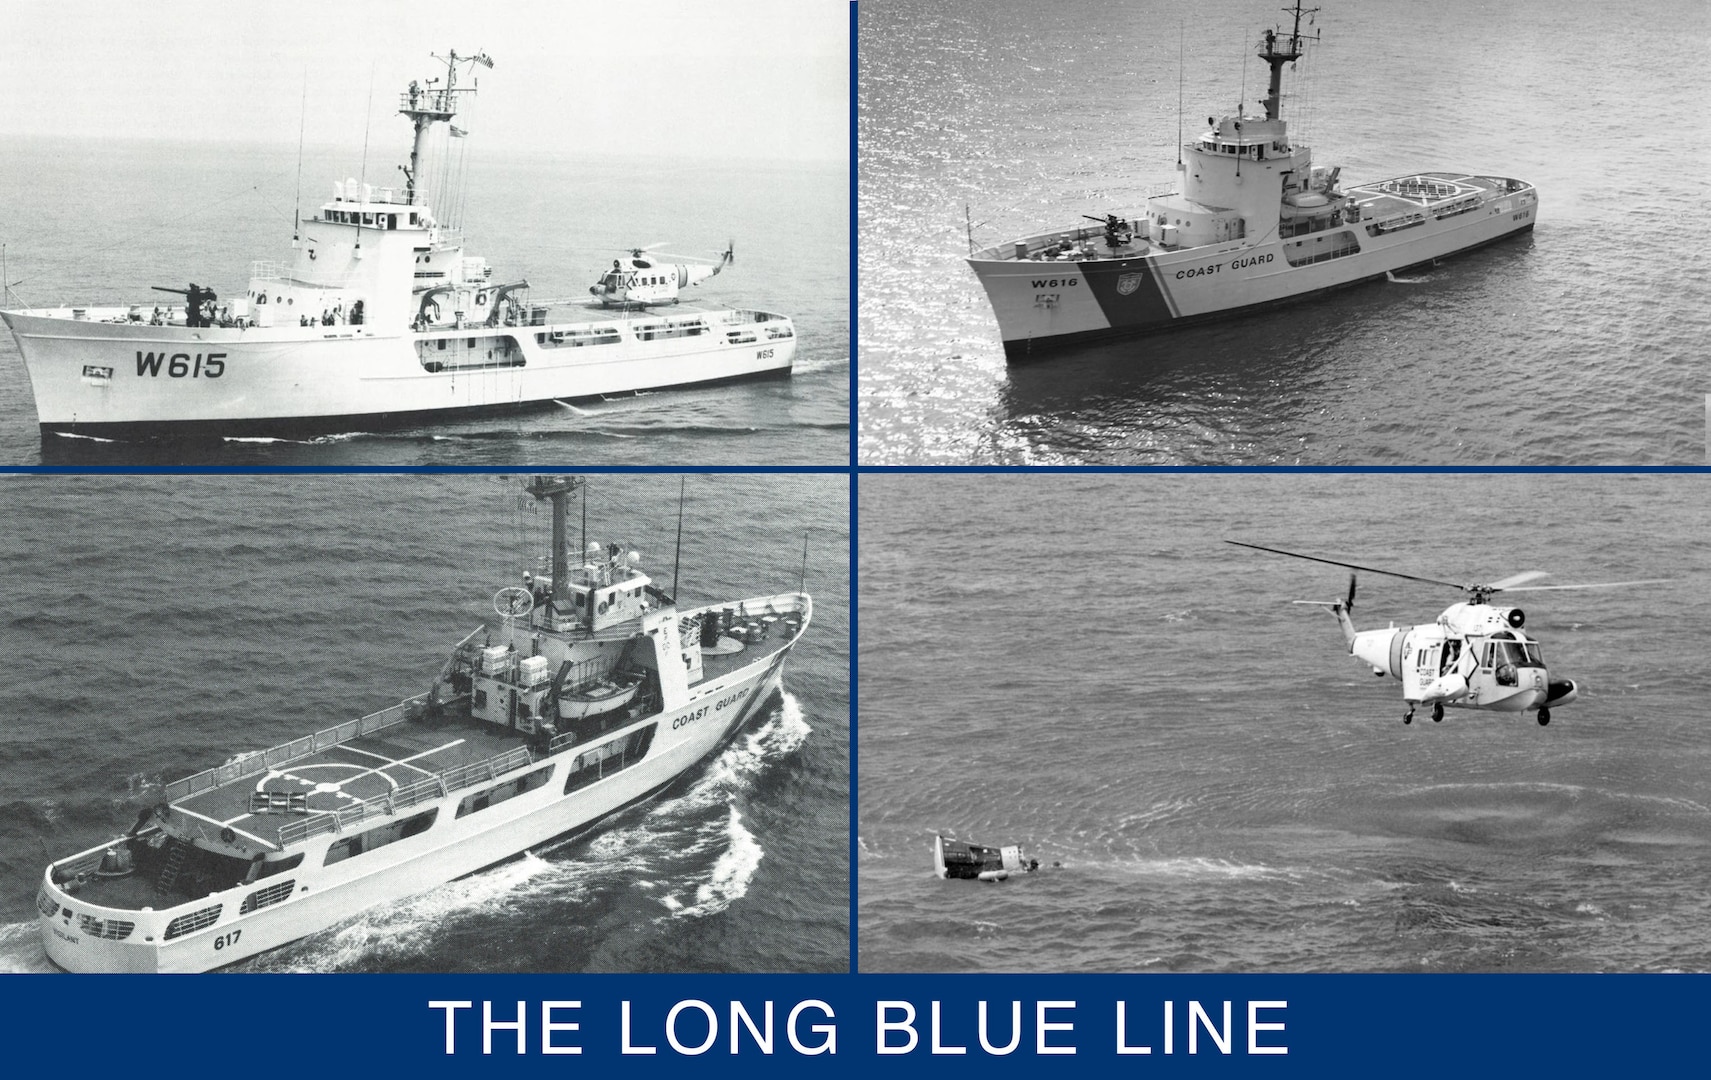 Coast Guard cutter Reliance conducting helicopter operations circa 1964. (U.S. Coast Guard photo).

Coast Guard cutter Diligence shown with the prototype “racing stripe” painted on the bow in December 1966. (Coast Guard Historian’s Archive).

The extensive accommodation for helicopter operations is shown by this photo of third-in-class 210 cutter Vigilant. (U.S. Coast Guard photo)

A Coast Guard HH-52A launched from Diligence hovers over the Gemini III space capsule in 1965. (U.S. Navy National Museum of Naval Aviation photo)